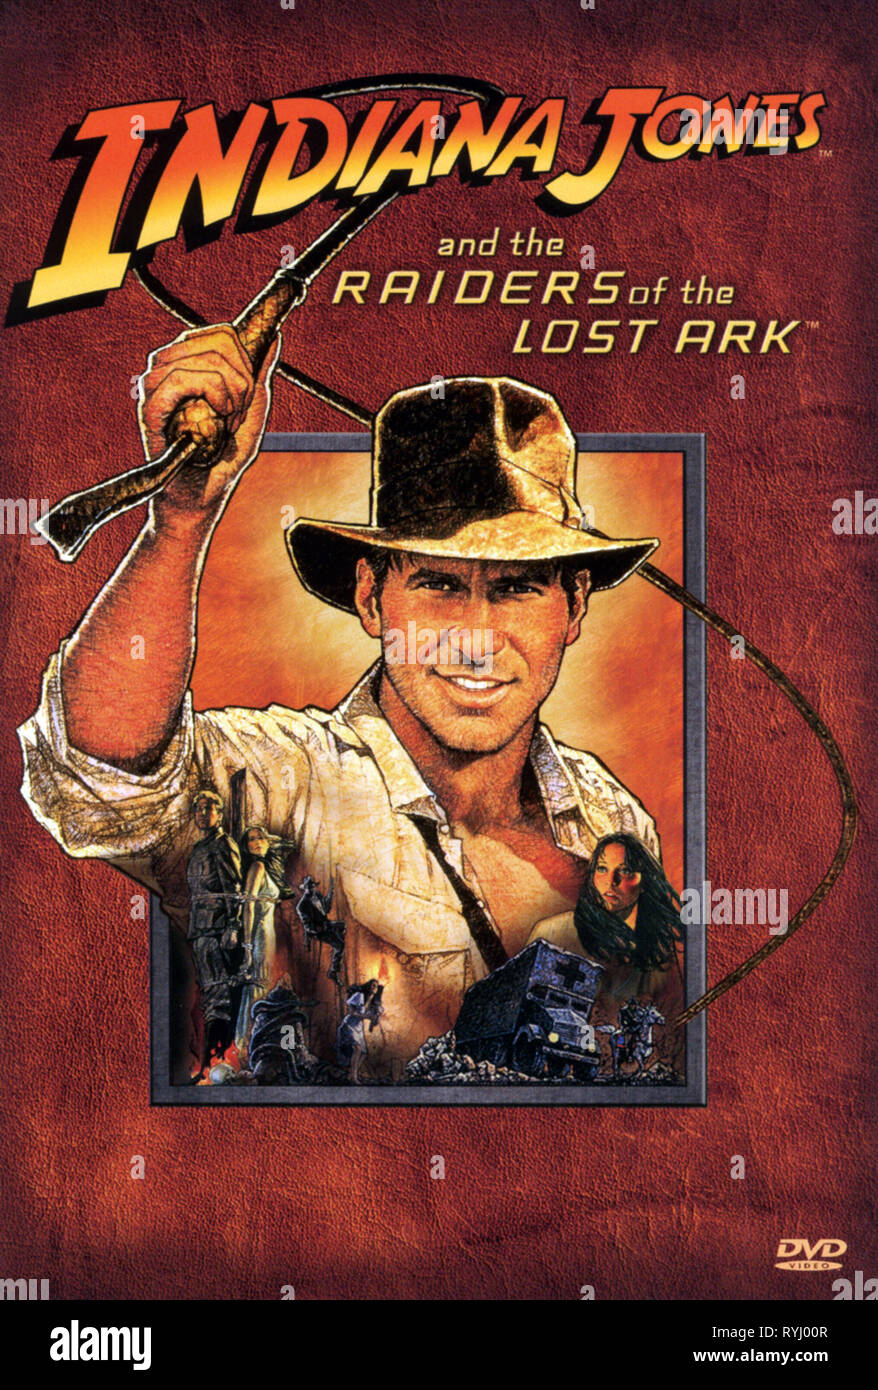 HARRISON FORD DVD COVER, INDIANA JONES AND THE RAIDERS OF THE LOST ARK,  1981 Stock Photo - Alamy